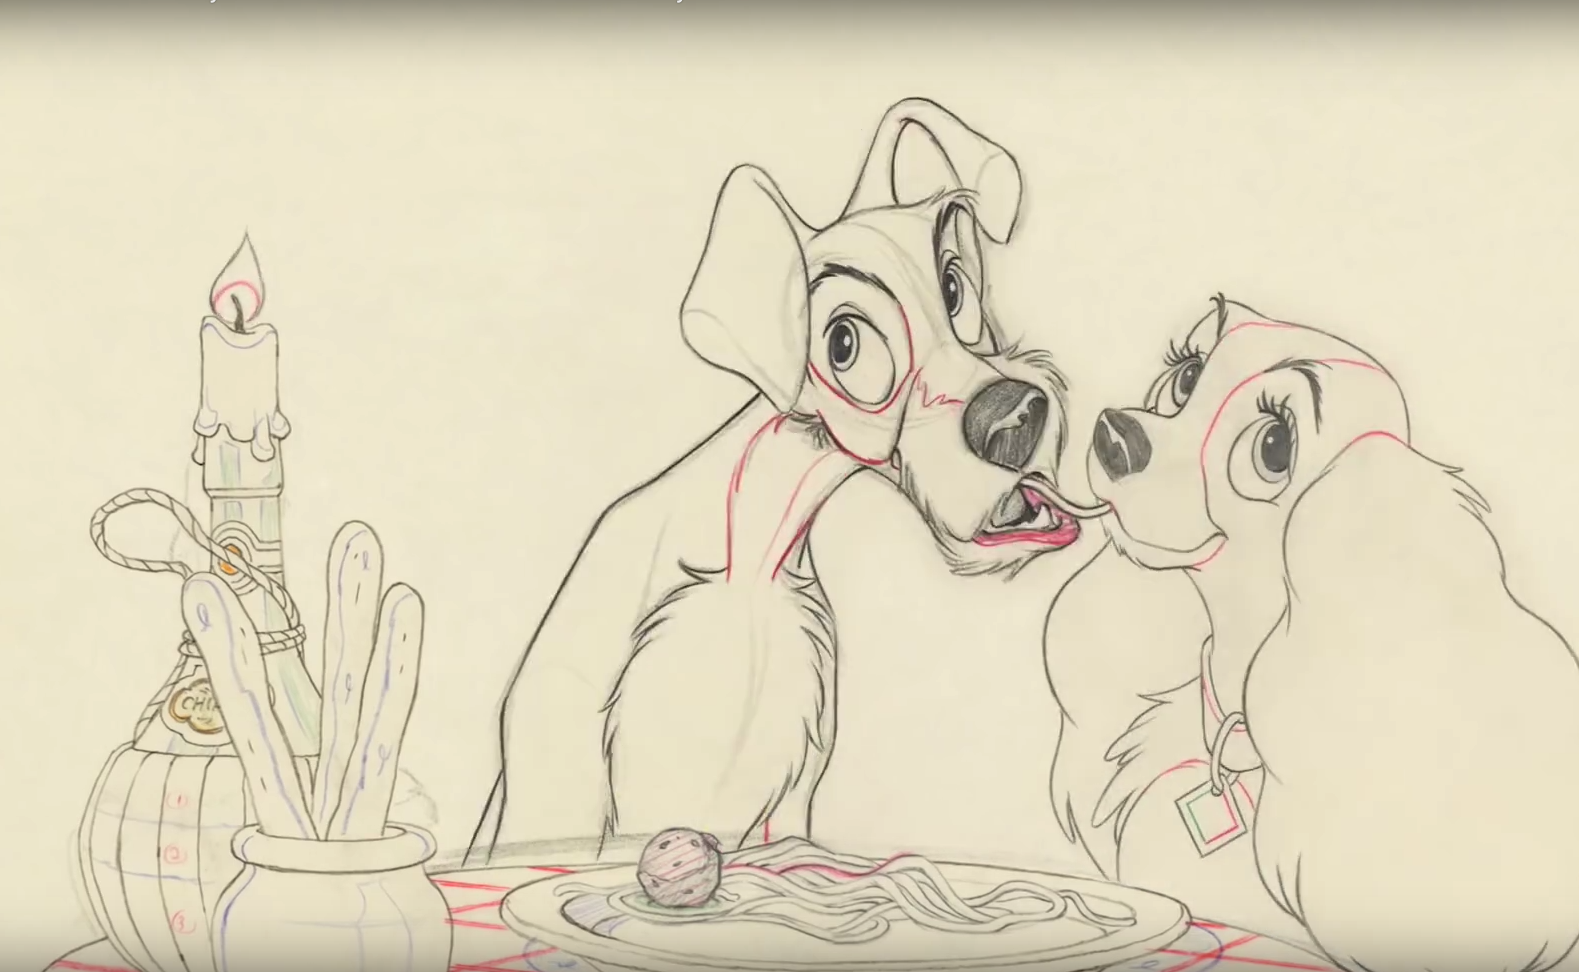 A Lady & the Tramp Masterpiece.